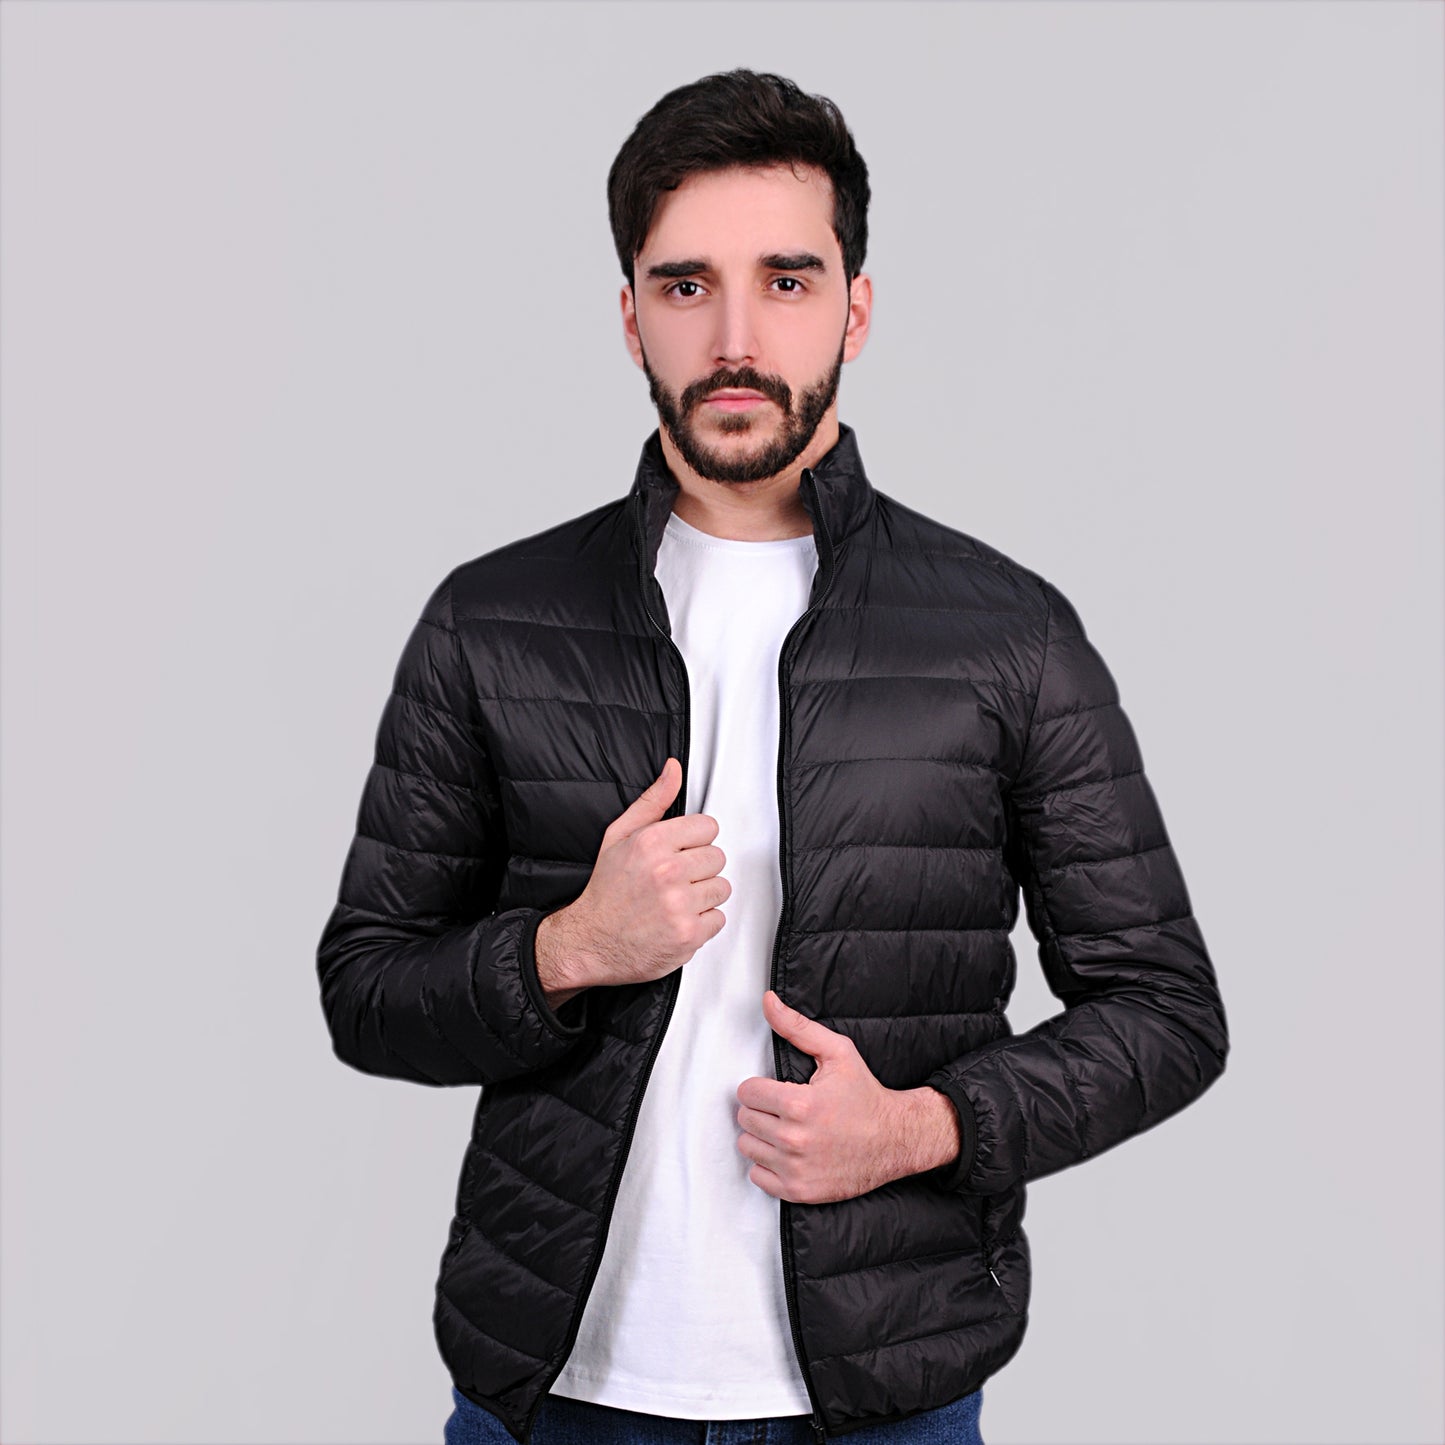 2H Light weight Black Casual Jacket